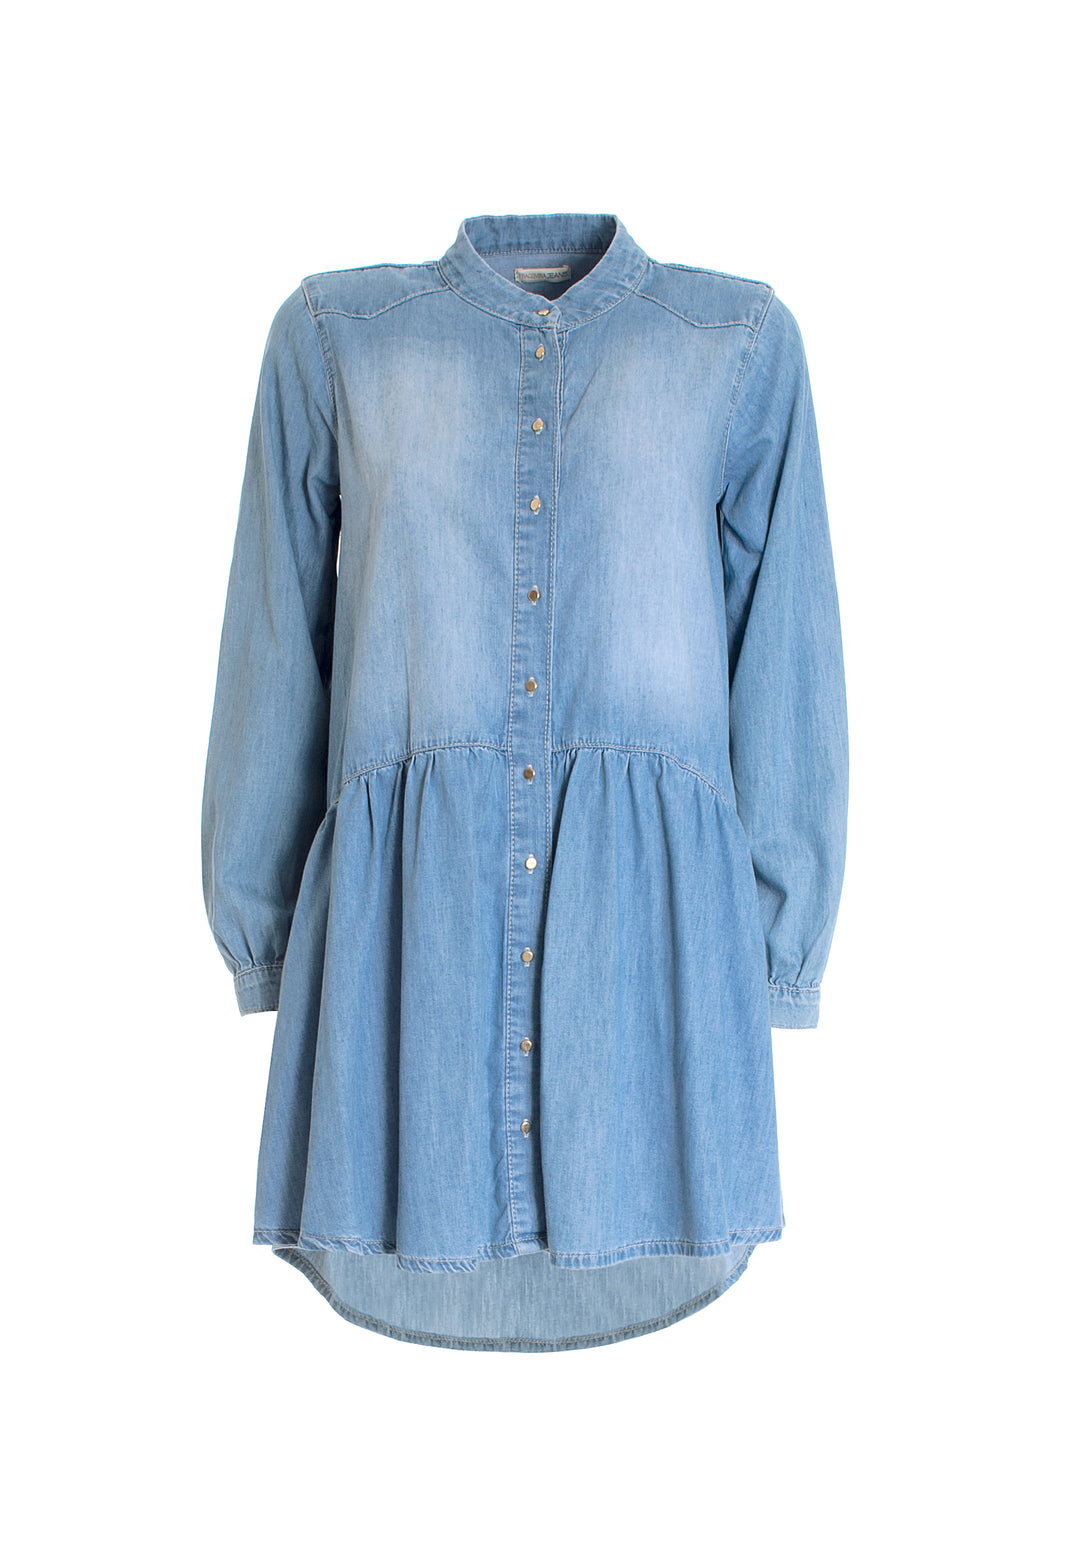 Chemisier dress with A-shape made in chambray